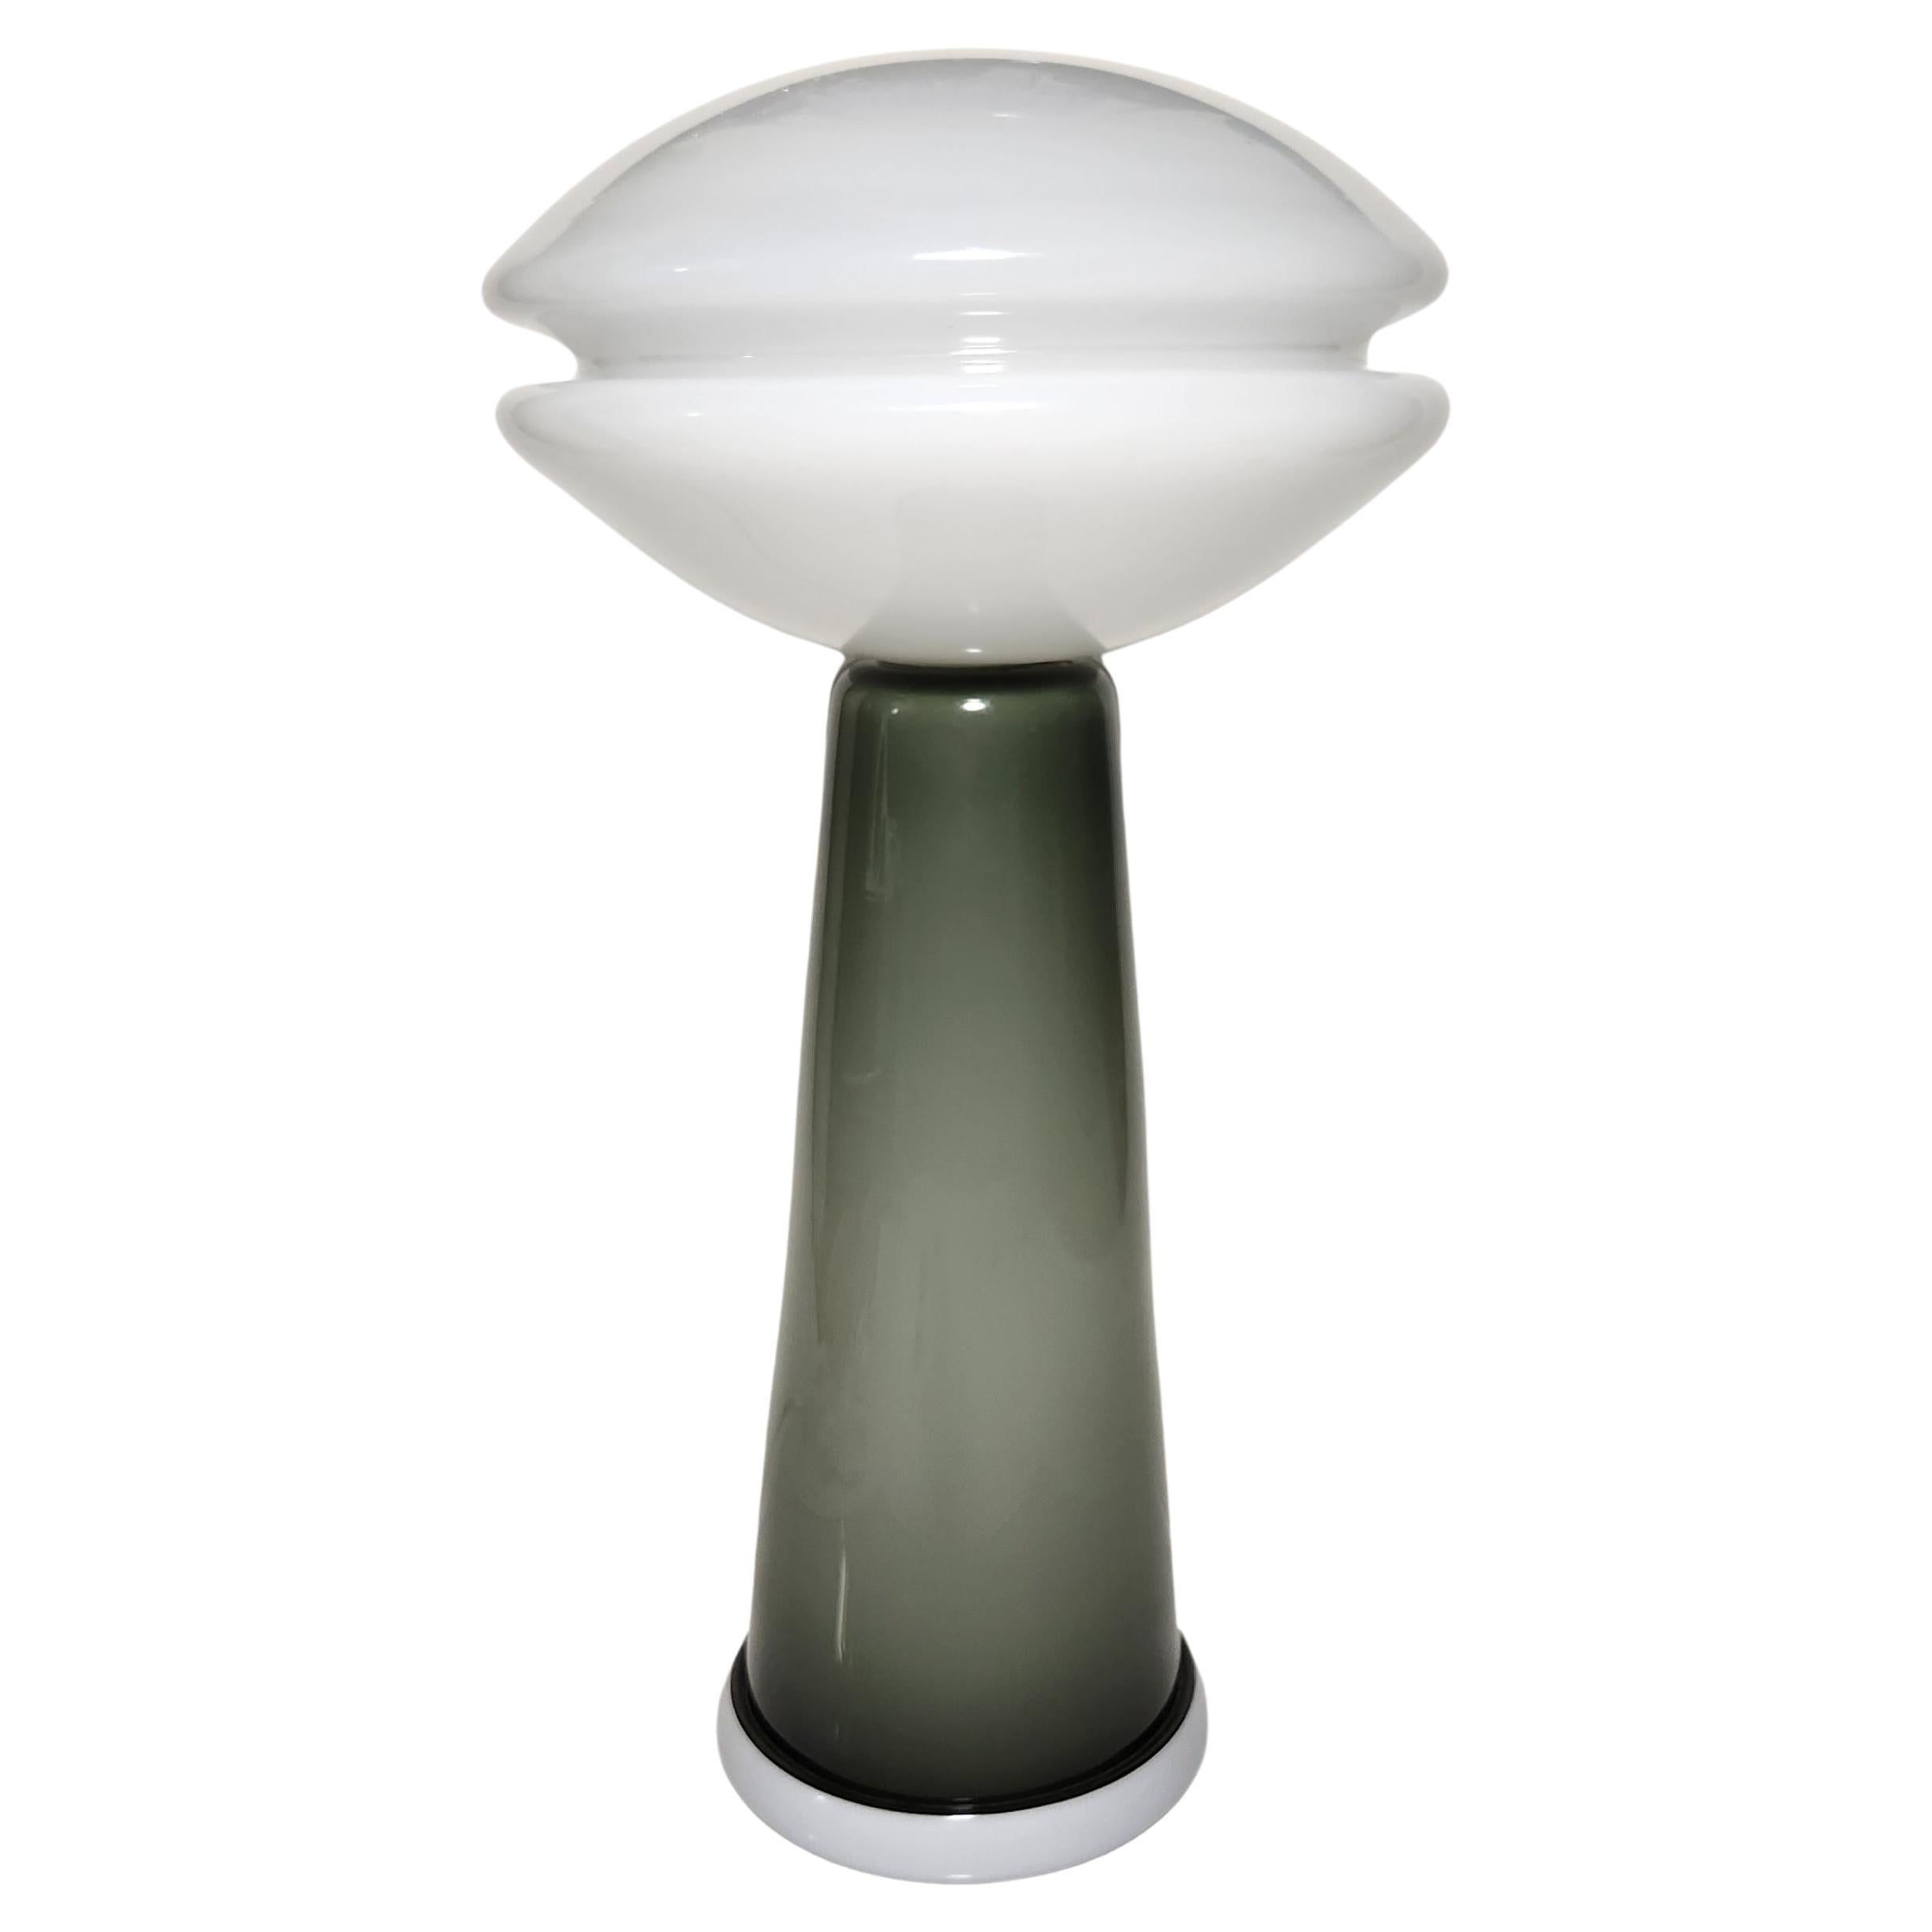 Groove Series Futura Table Lamp in Grey, Contemporary Blown Glass Lighting